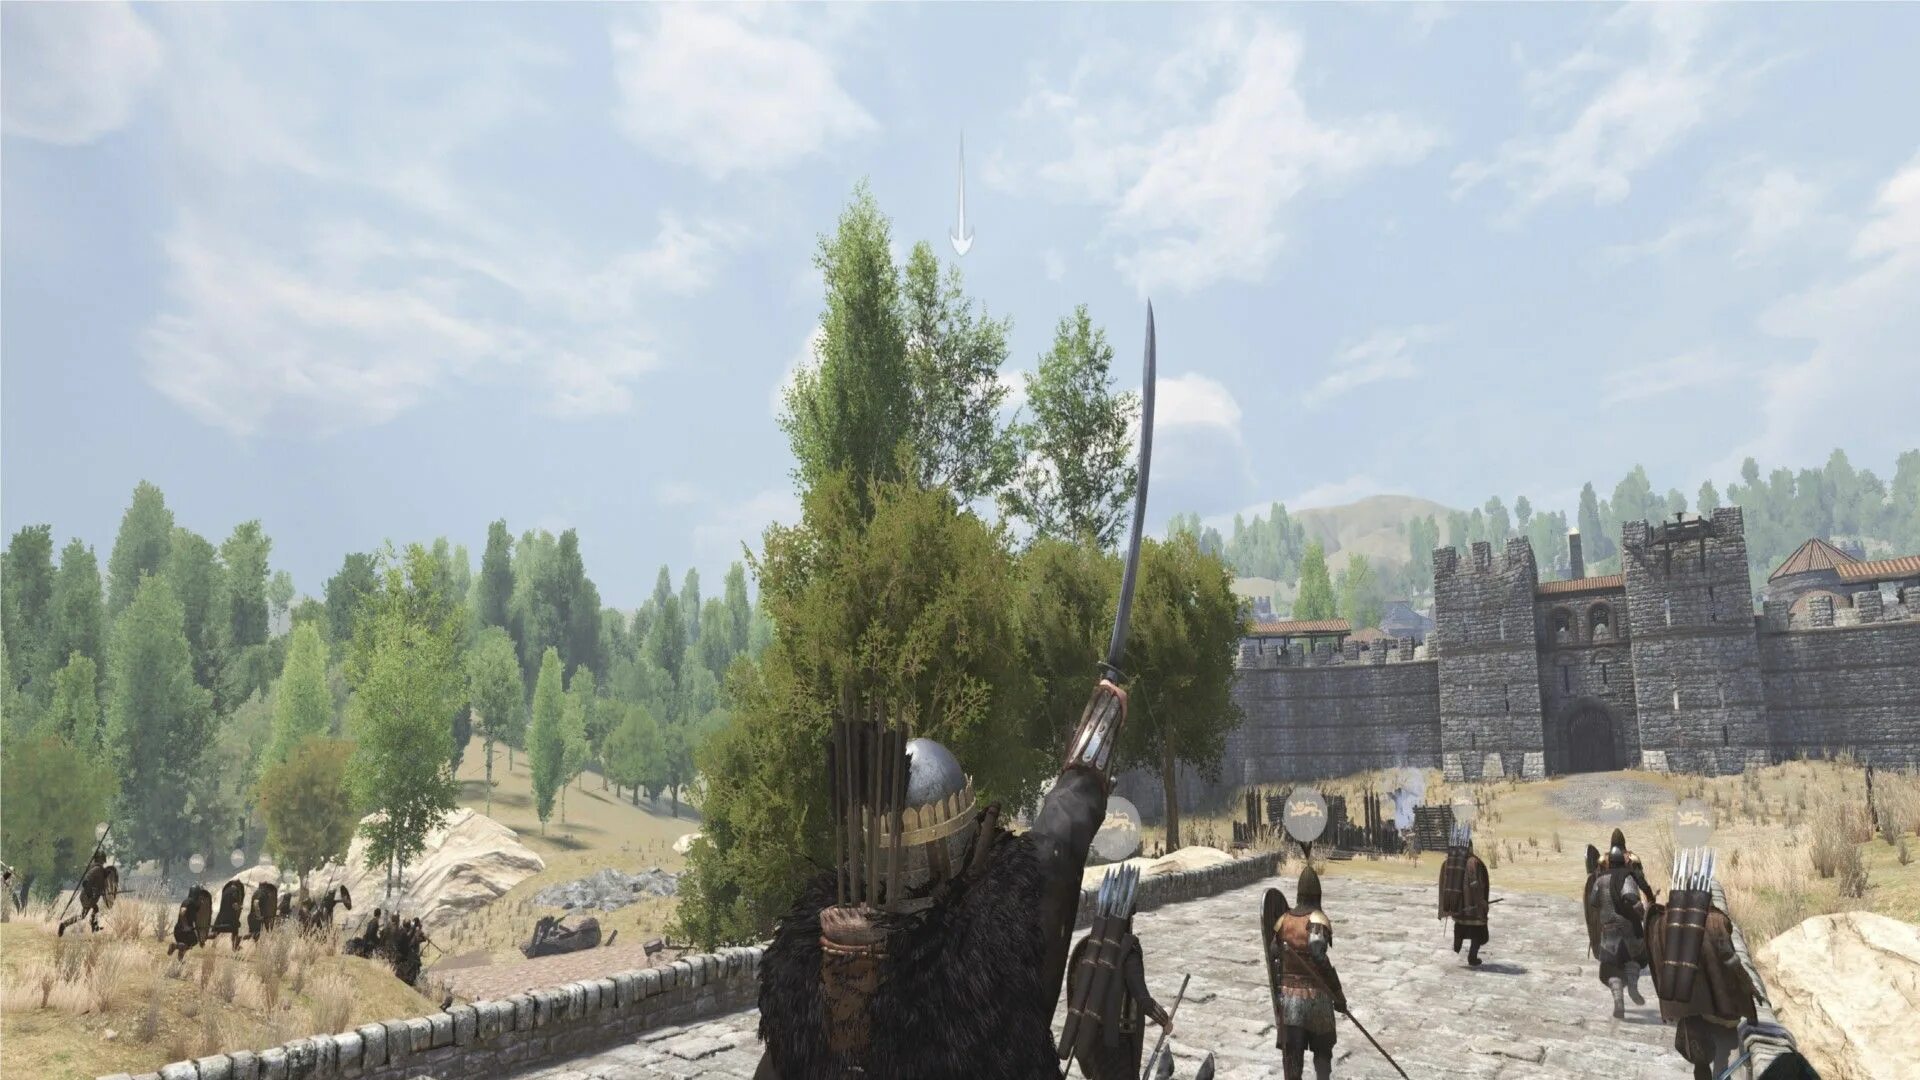 Mount and Blade 2 Bannerlord. Mount and Blade 2 Bannerlord старт. Mount & Blade II: Bannerlord (2022) PC. Mount and Blade 2 Bannerlord аваситон. Mount and blade bannerlord караваны